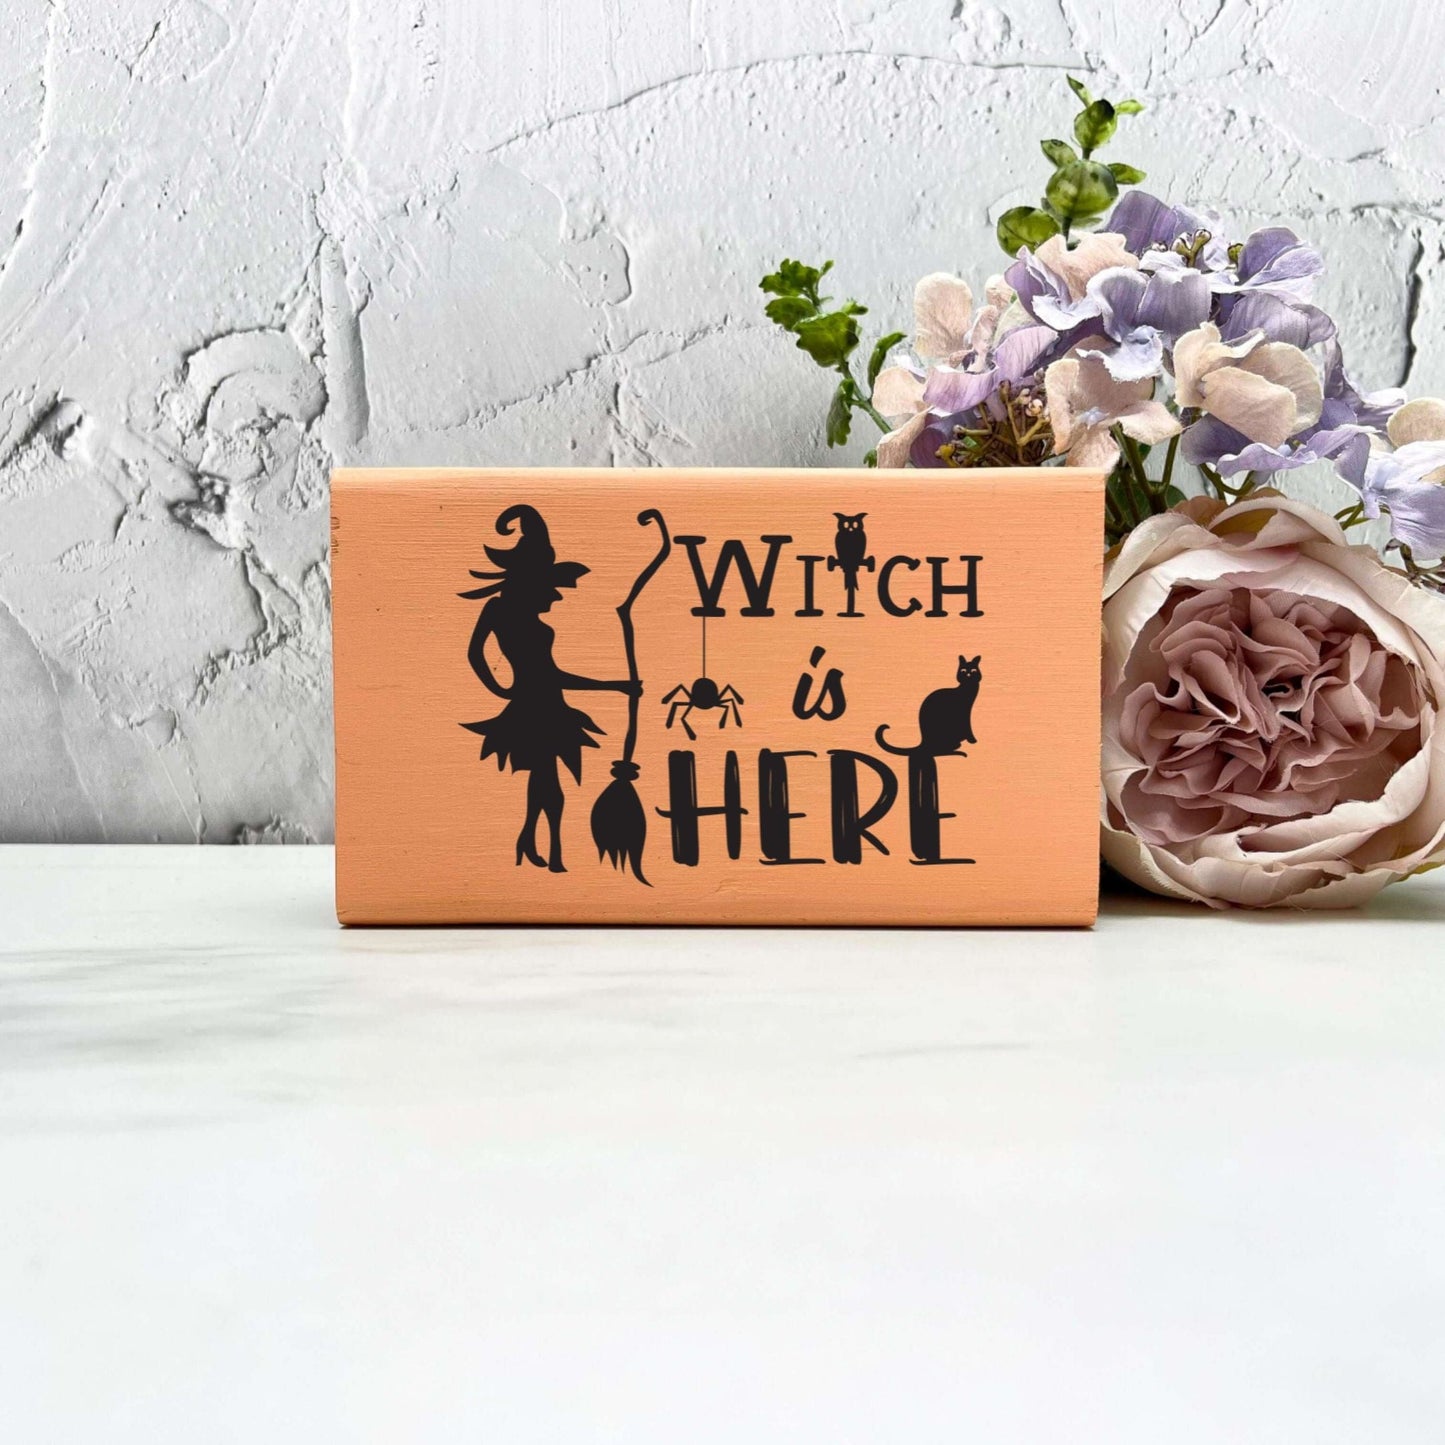 Witch is here halloween Sign, Halloween Wood Sign, Halloween Home Decor, Spooky Decor